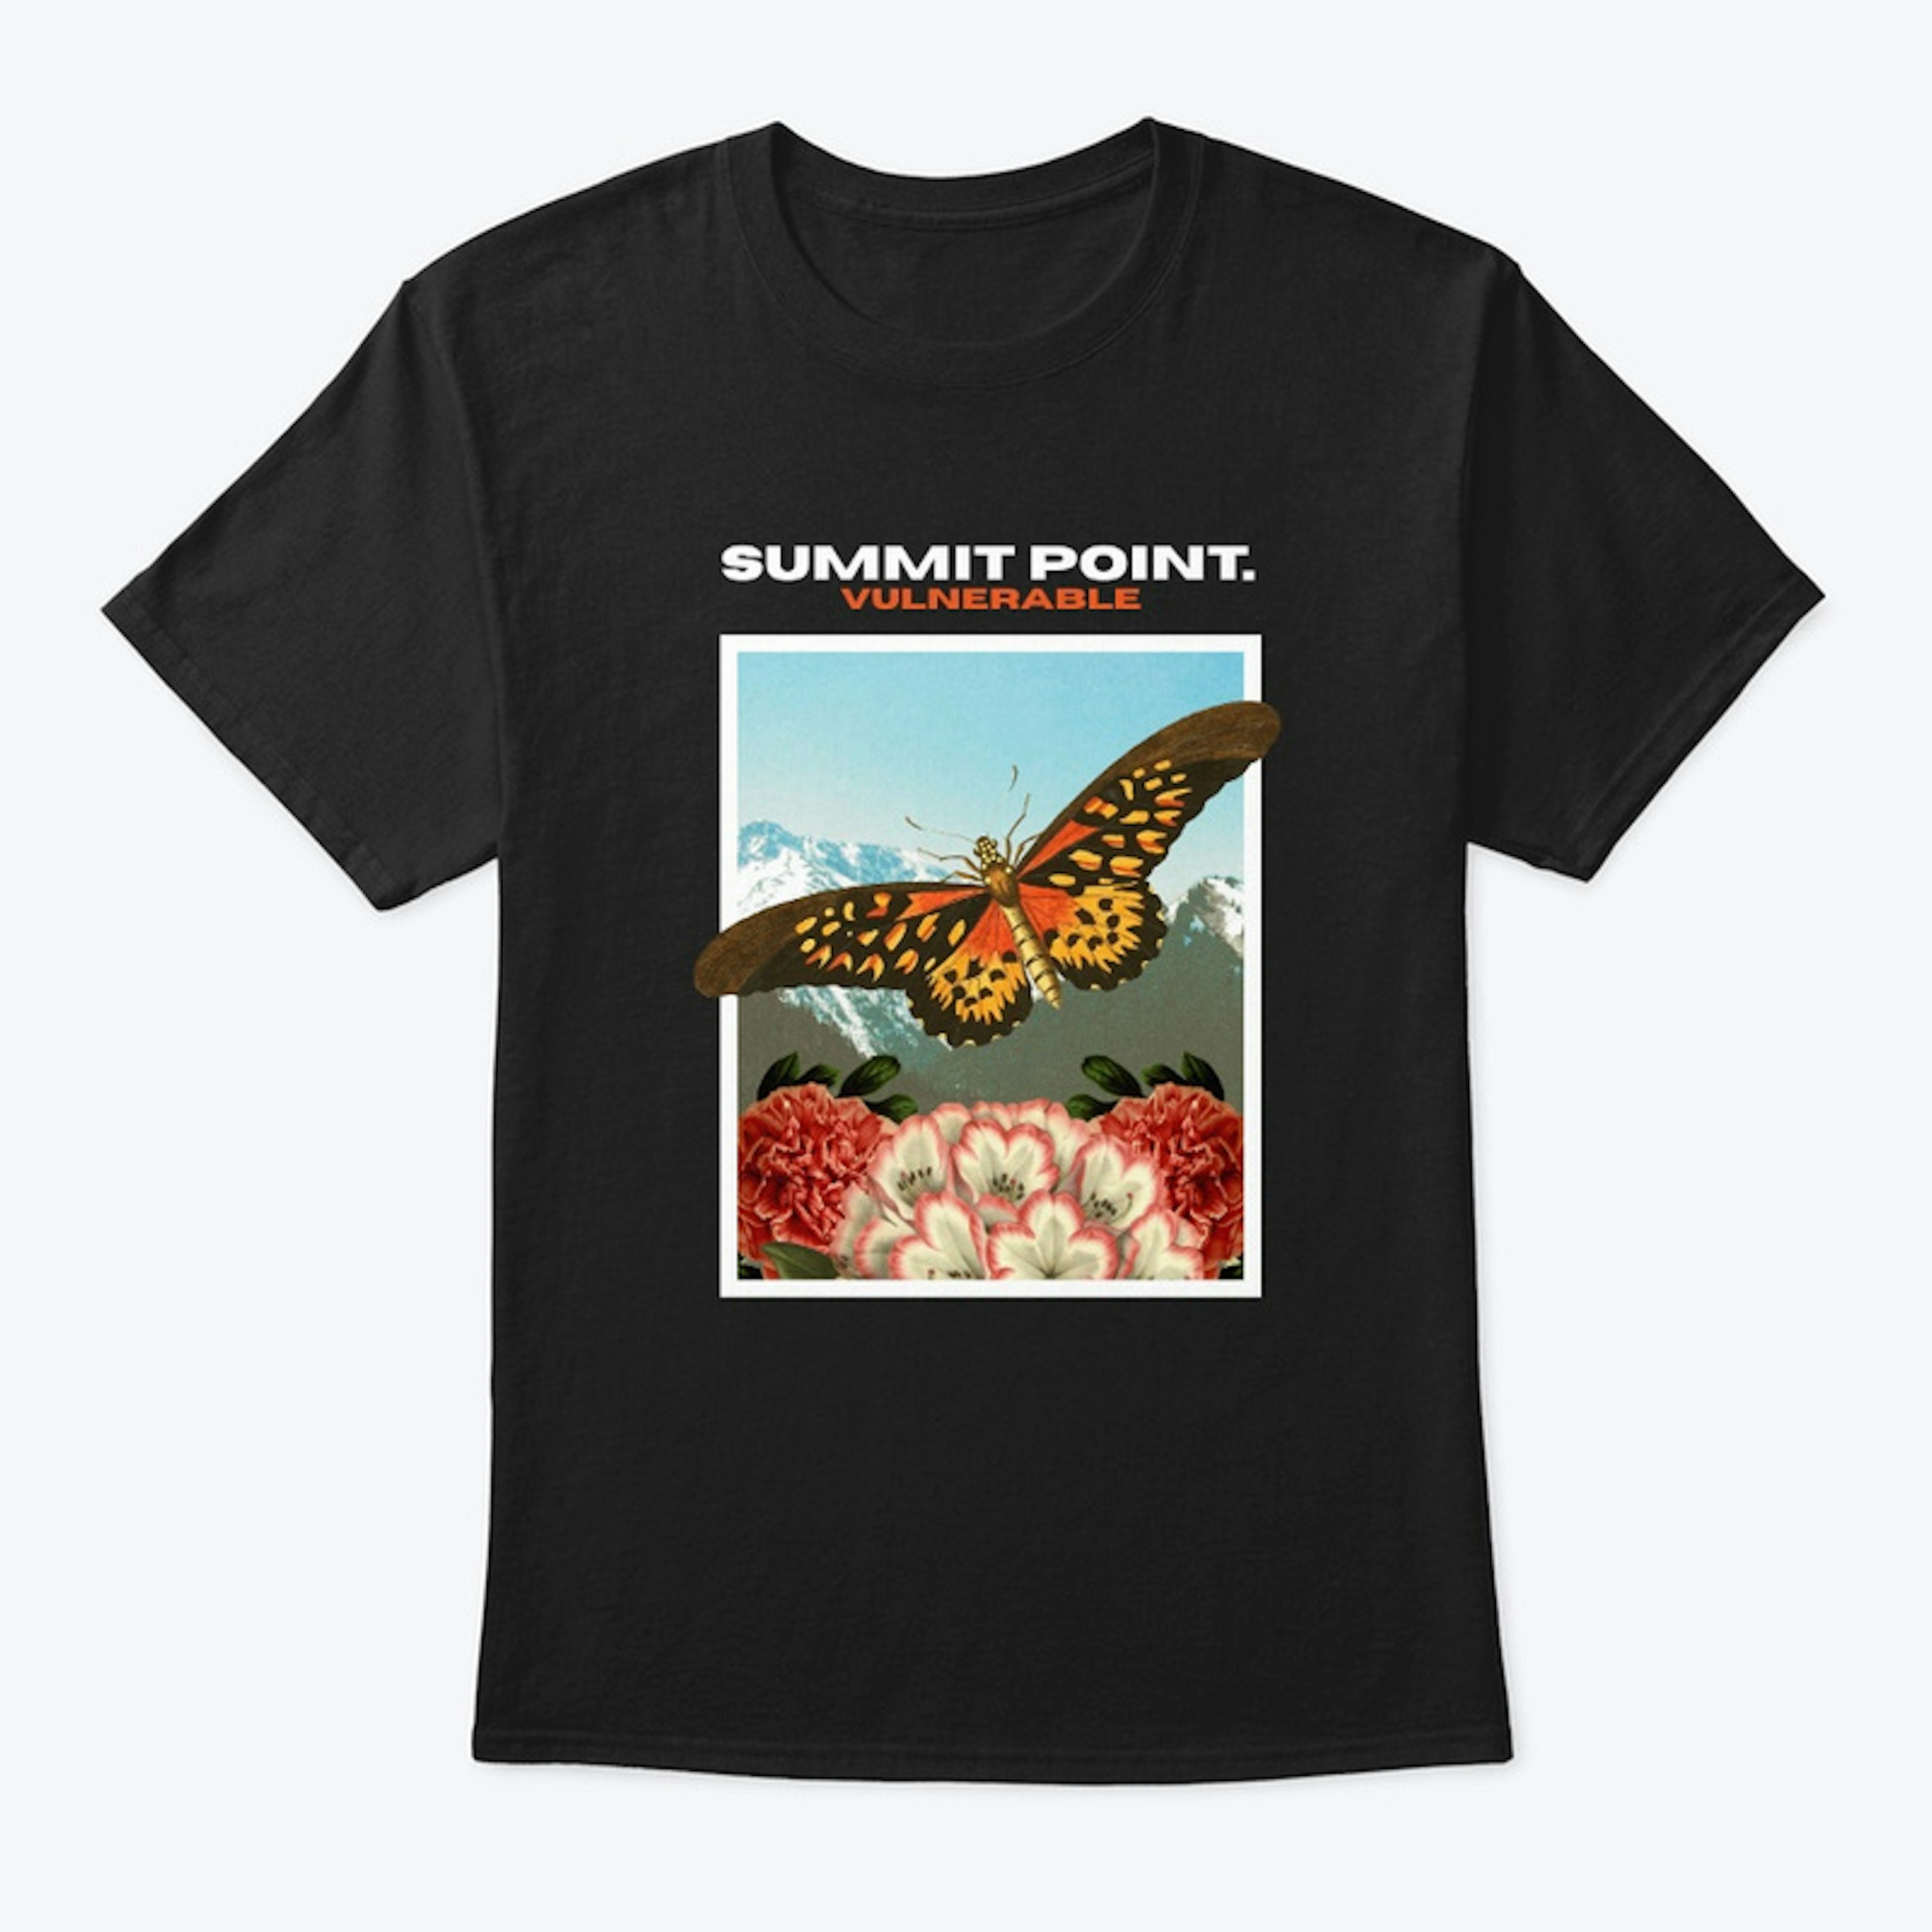 Butterfly "Vulnerable" Tee